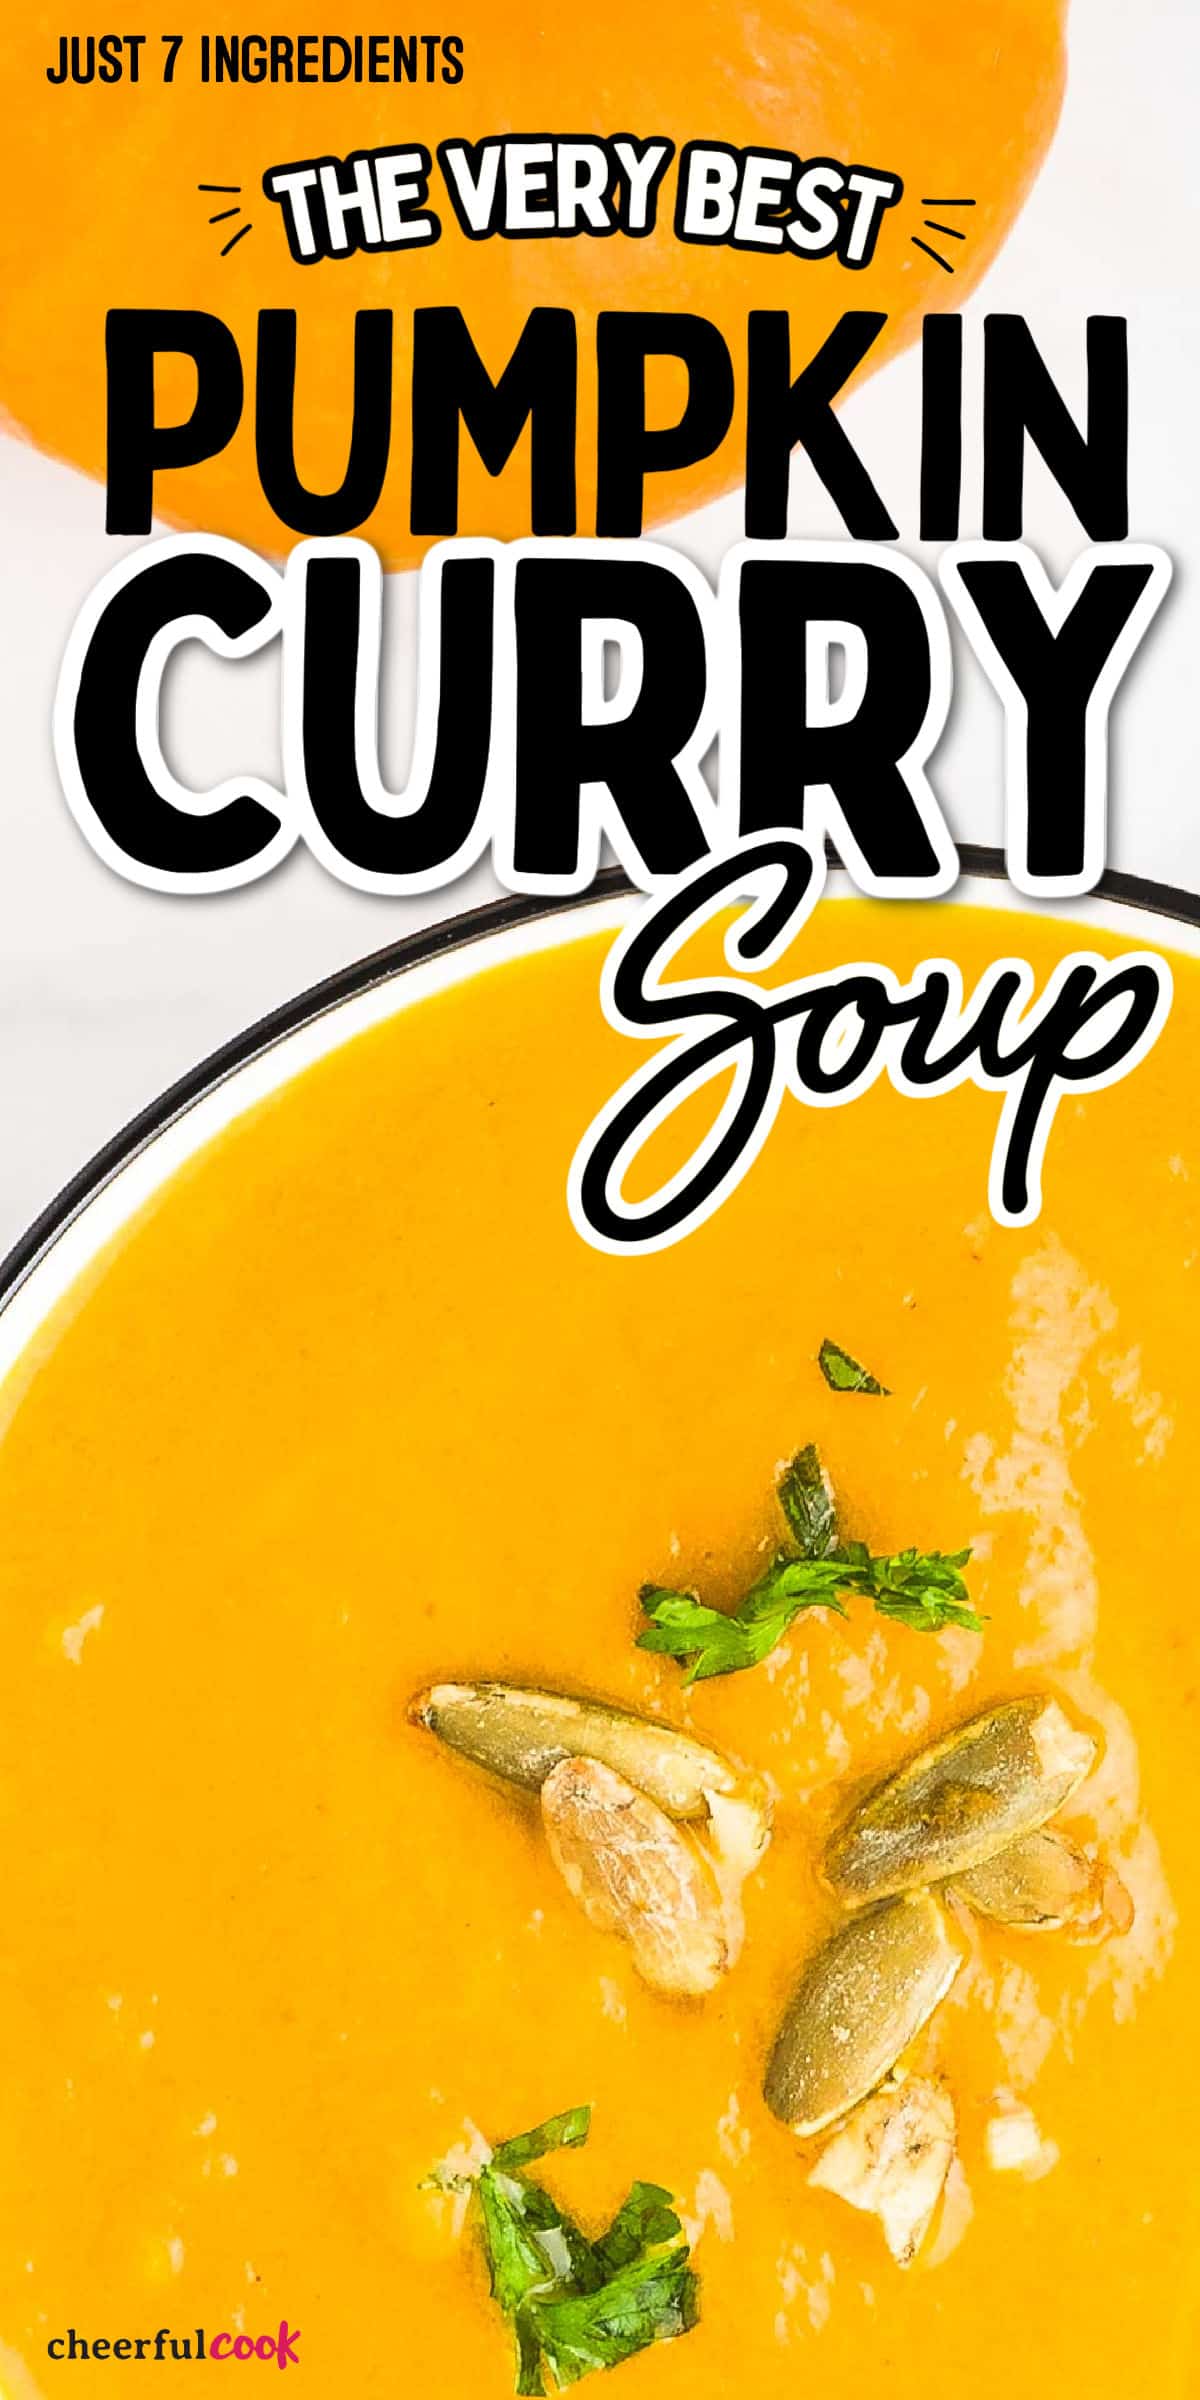 This Pumpkin Curry Soup blends classic pumpkin and curry spices into a deliciously rich and creamy fall soup! It strikes the perfect balance between sweet, savory, and spicy flavors. #cheerfulcook #curry #pumpkin #soup #currysoup #currypumpkin #recipe #best #easy #cannedpumpkin via @cheerfulcook